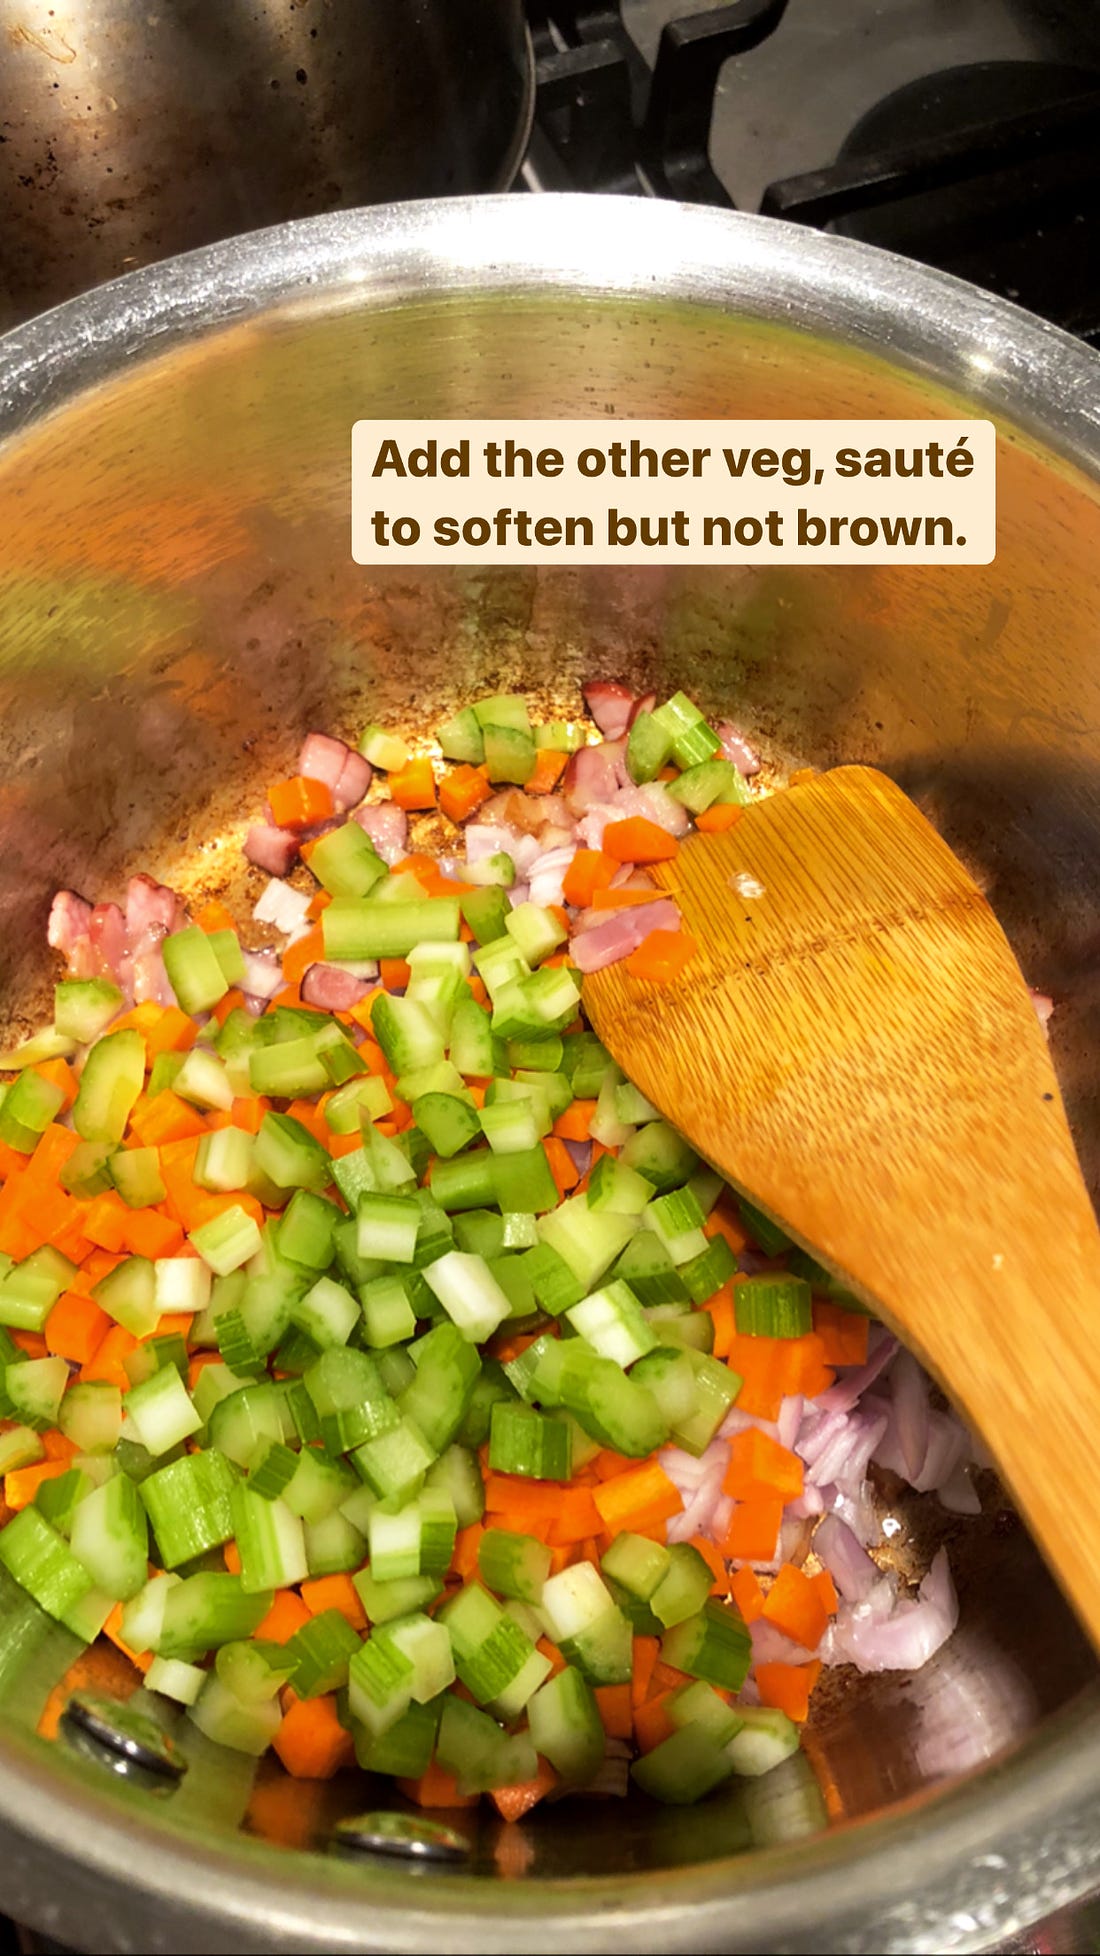 Celery, onion, and carrot added to the bacon